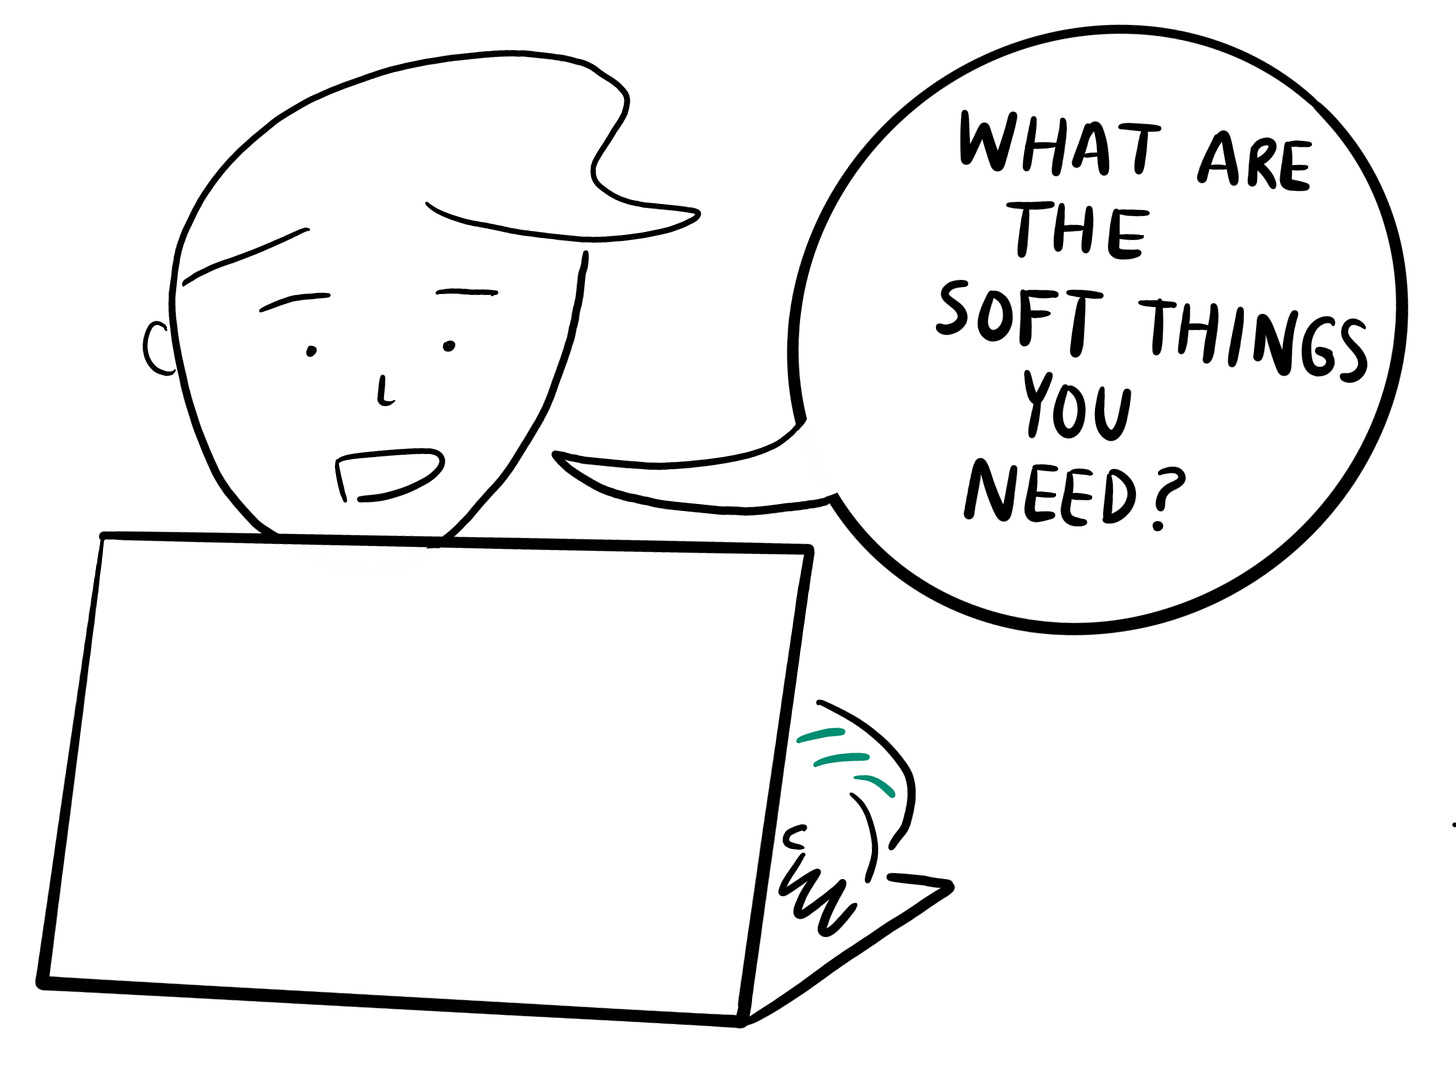 cartoonist behind laptop saying "what are some soft things you need?"